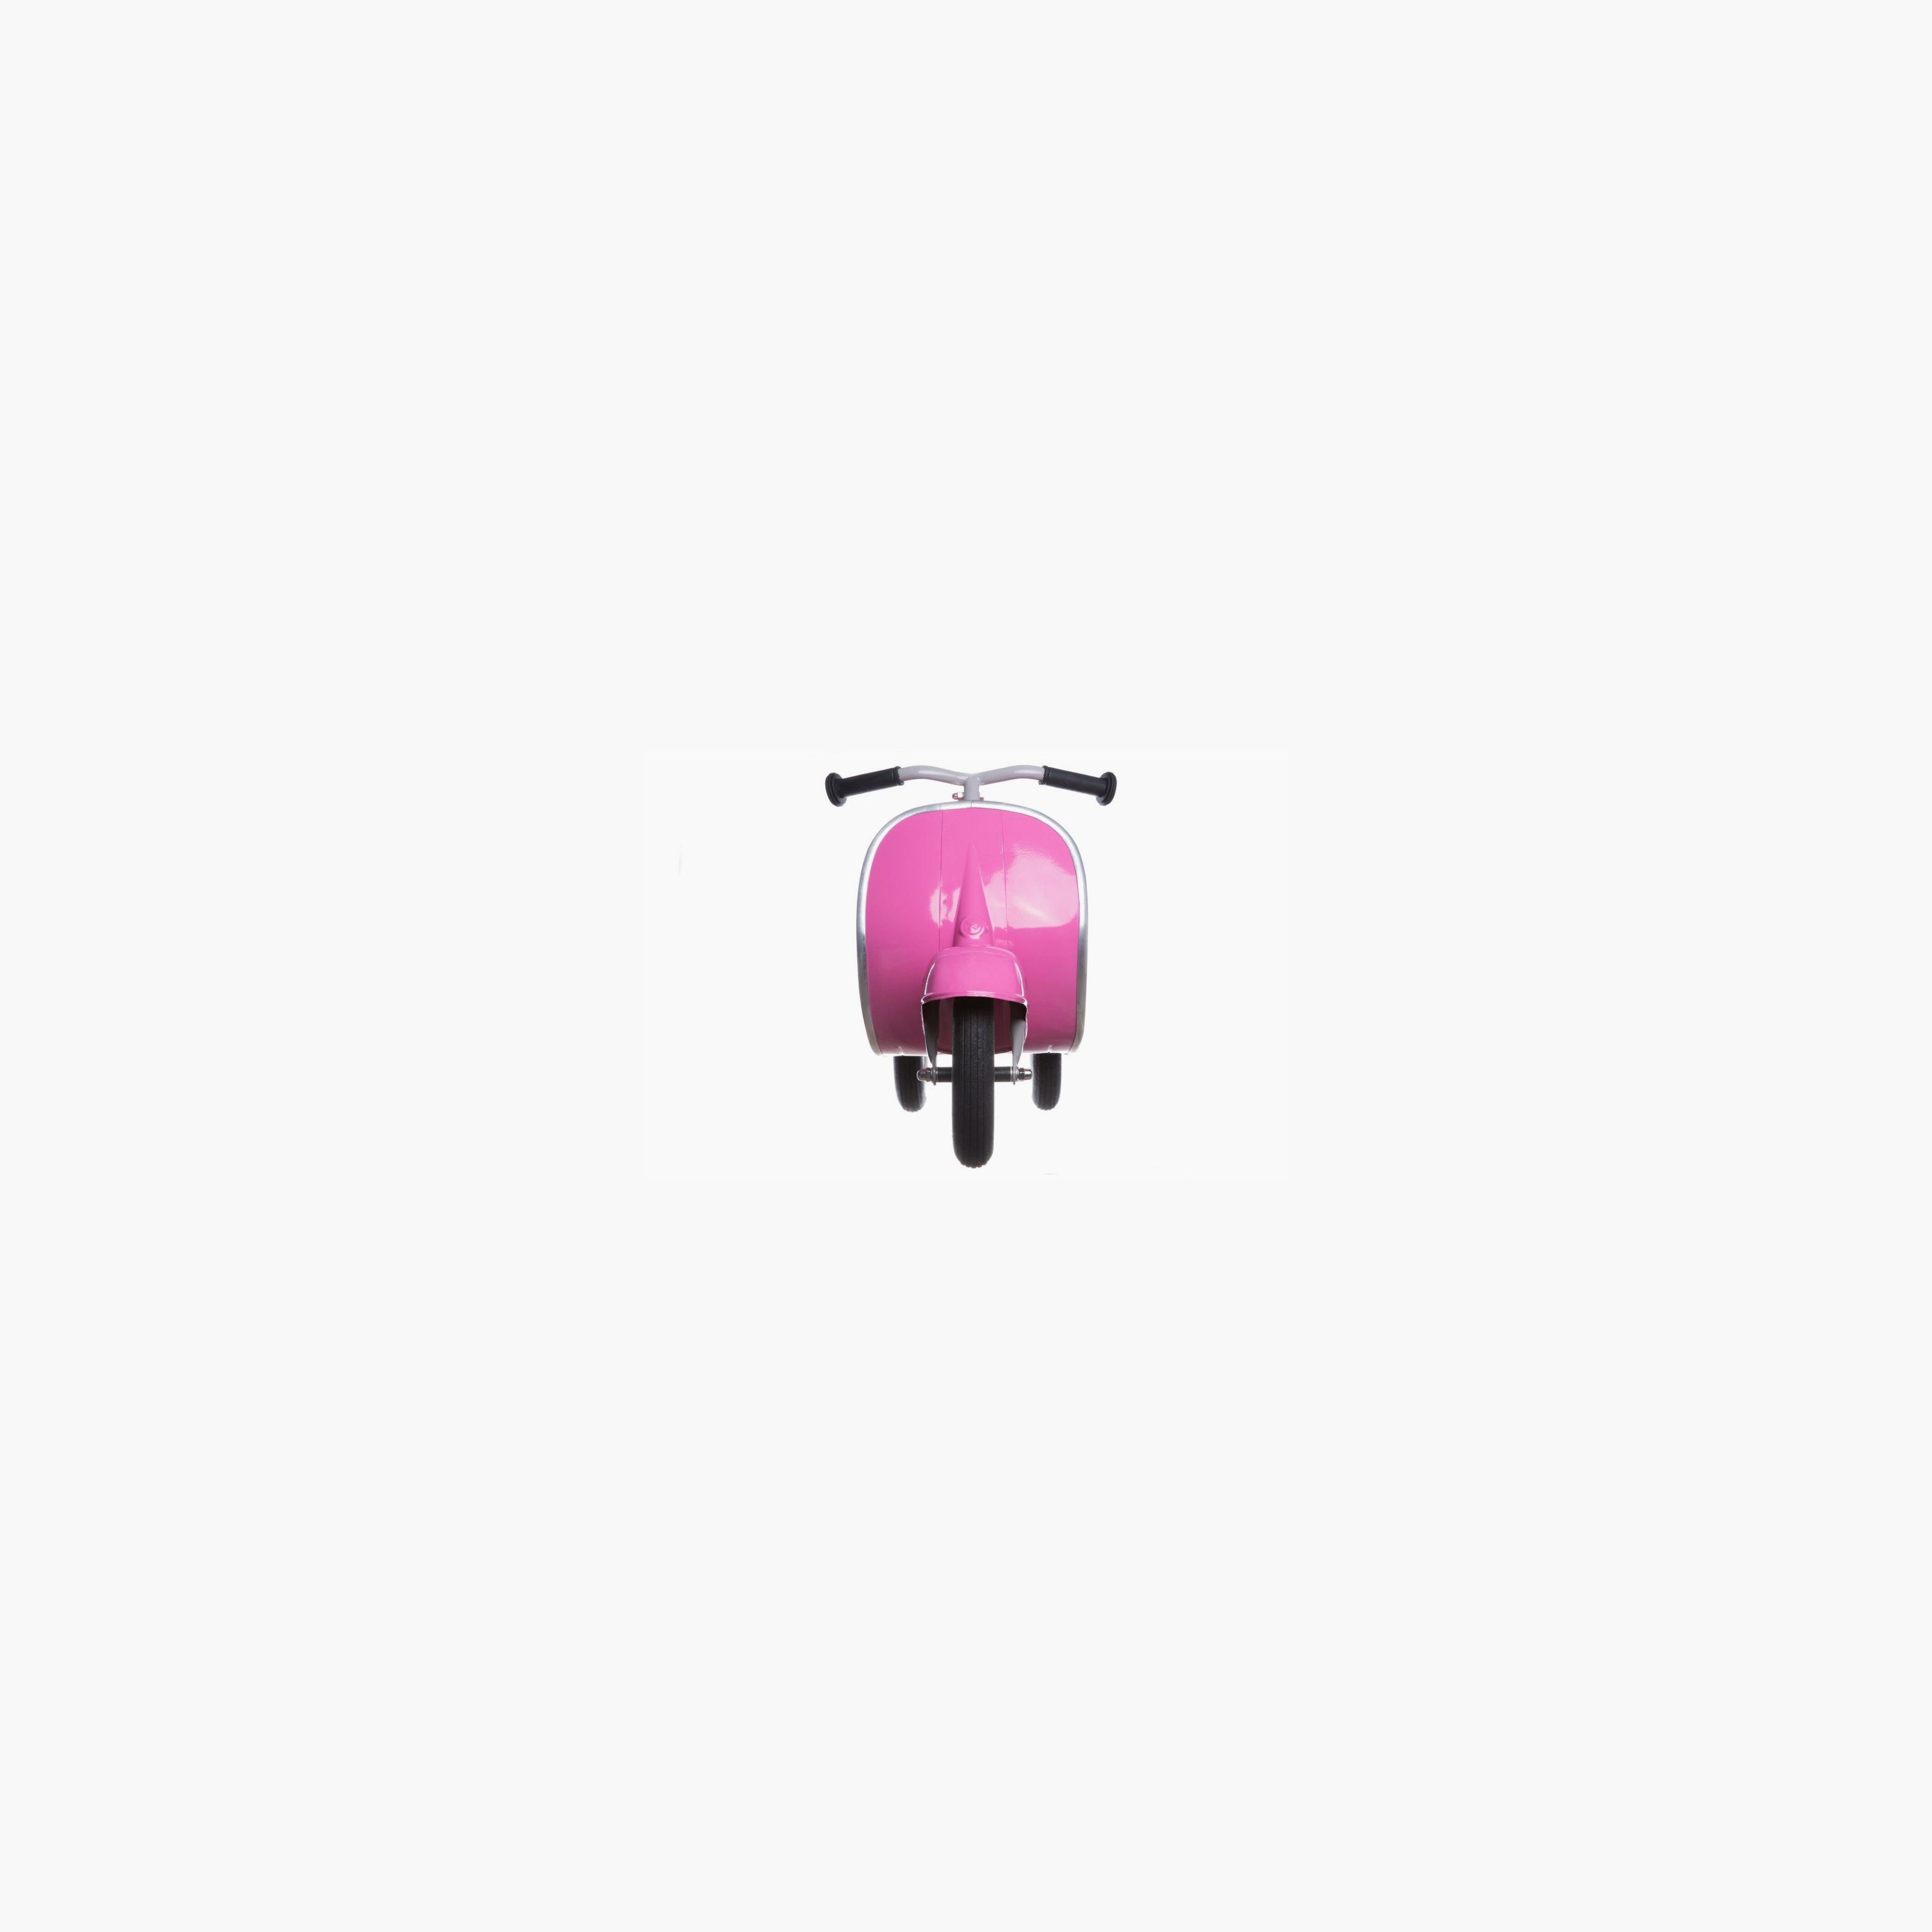 PRIMO Ride On Kids Toy Classic (Pink)